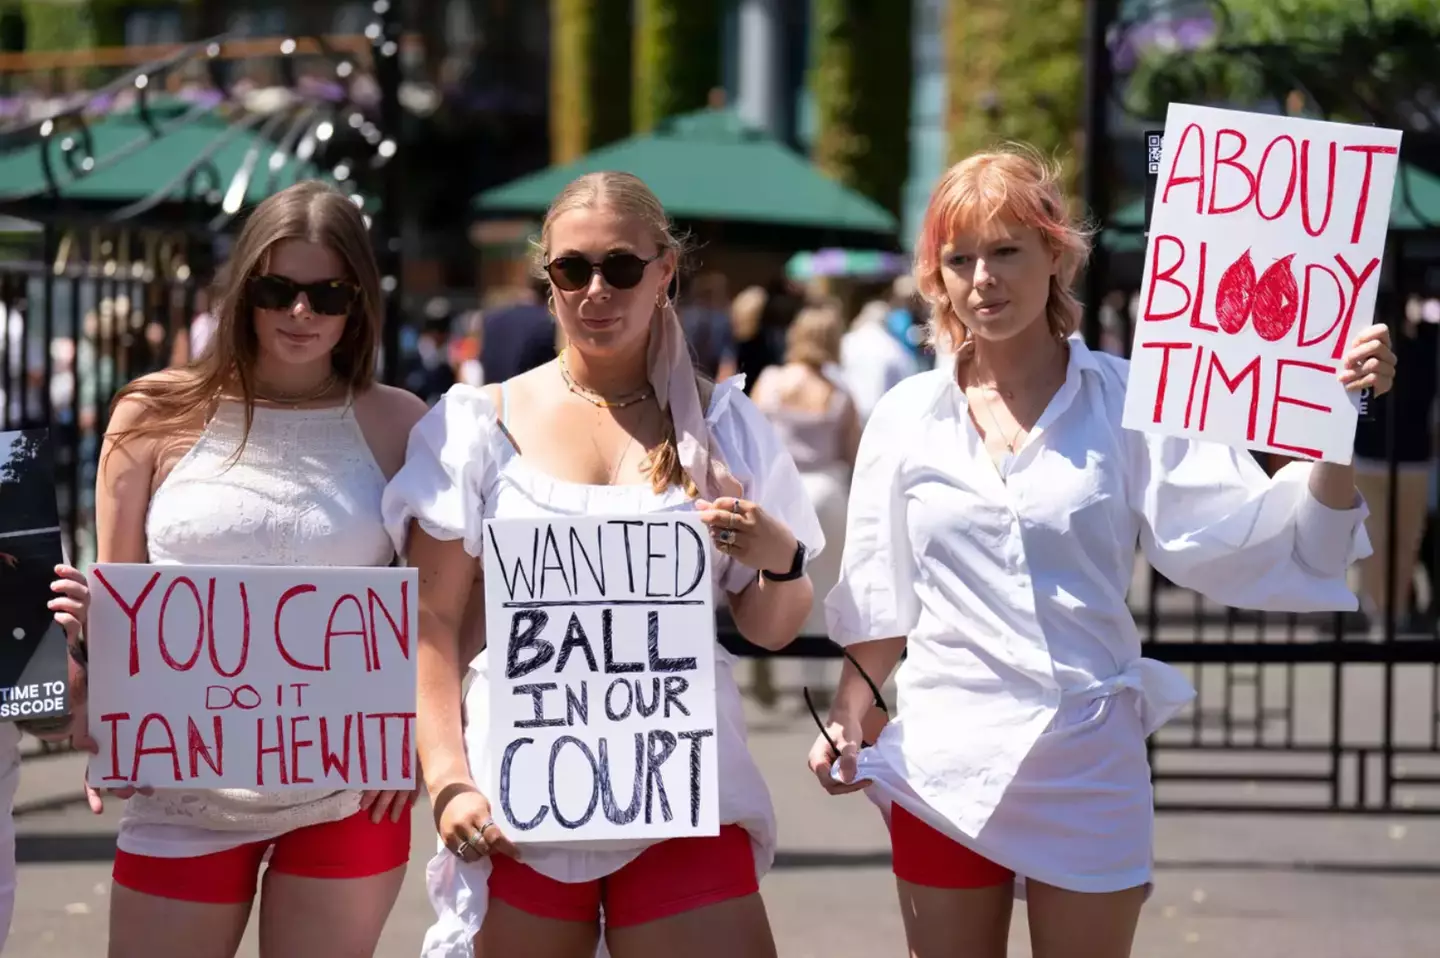 Protests took place over the all-white clothing rule.